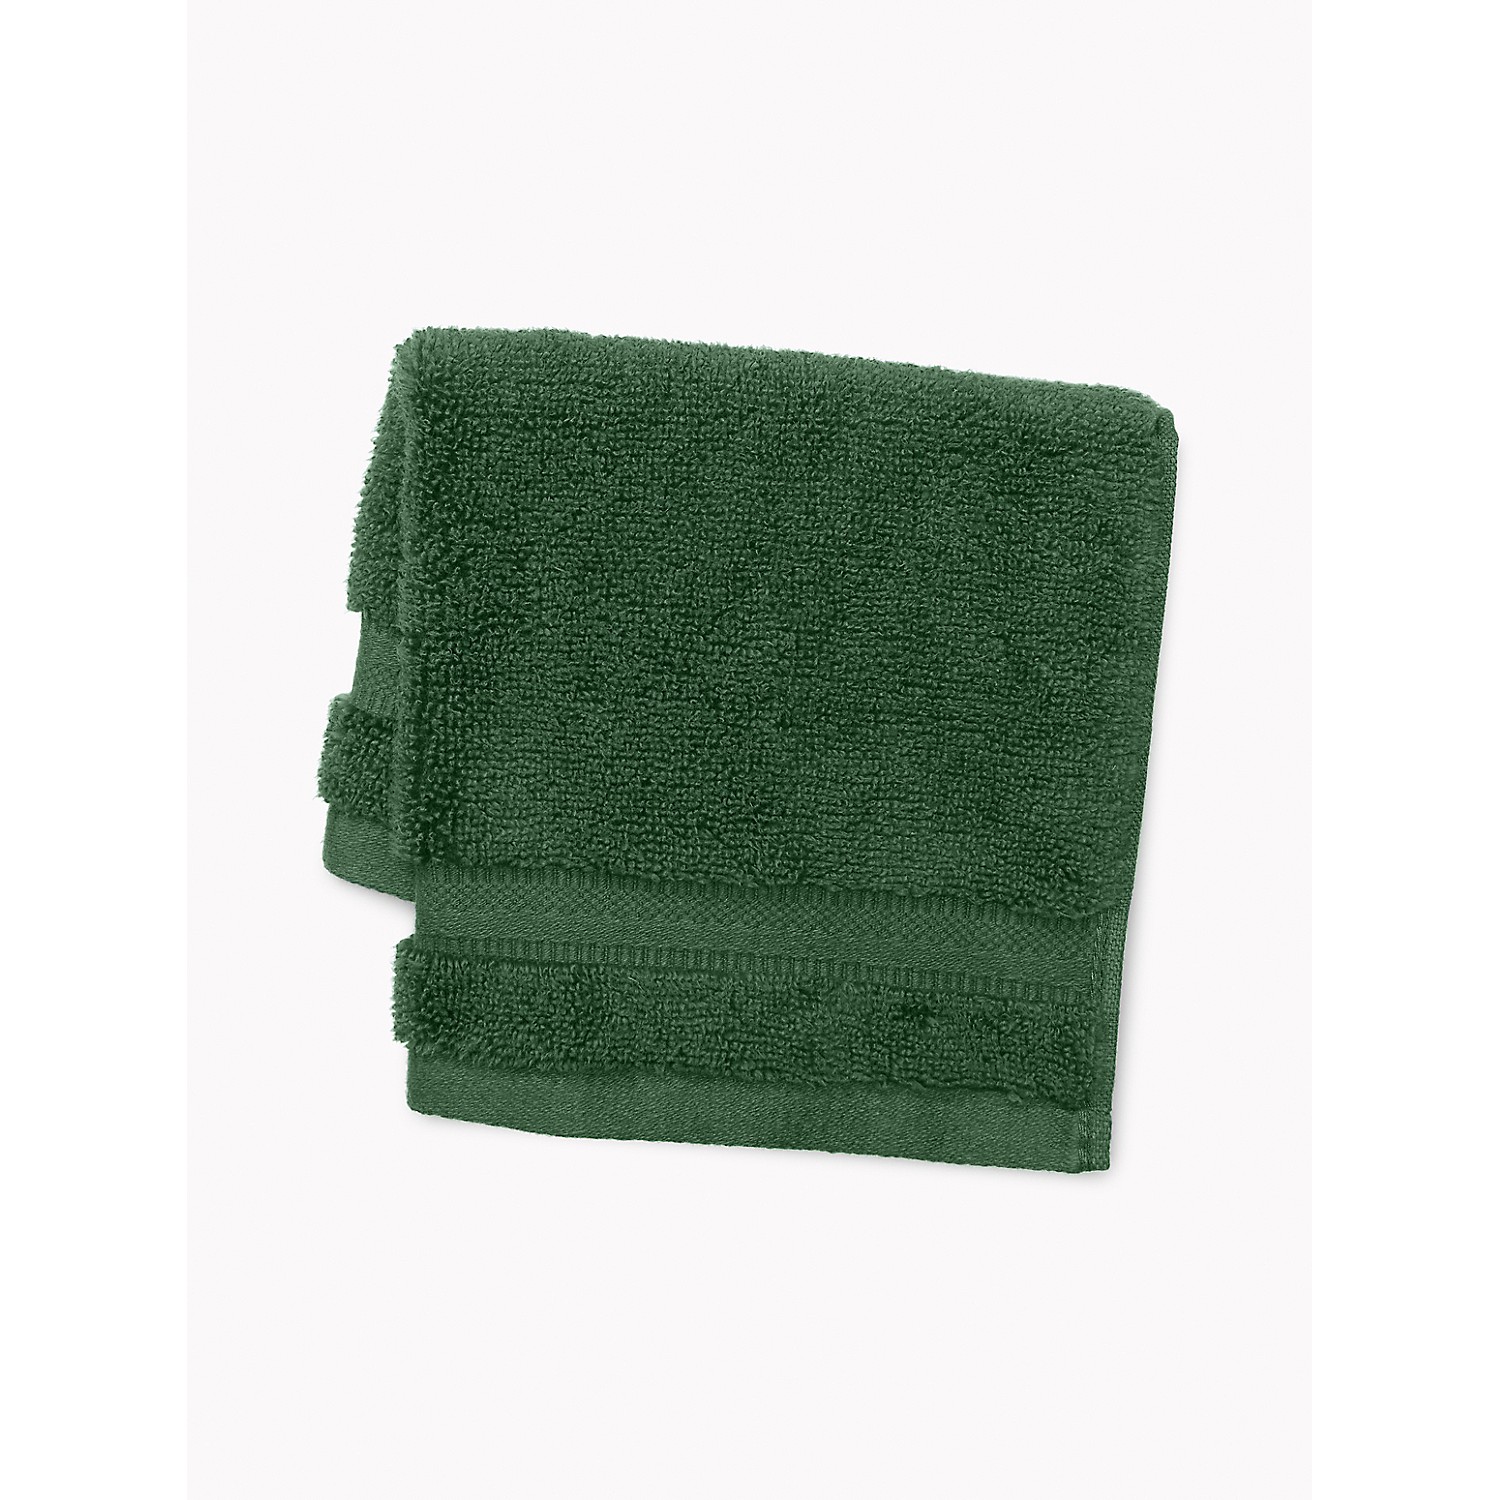 TOMMY HILFIGER Signature Solid Washcloth in Pine Needle